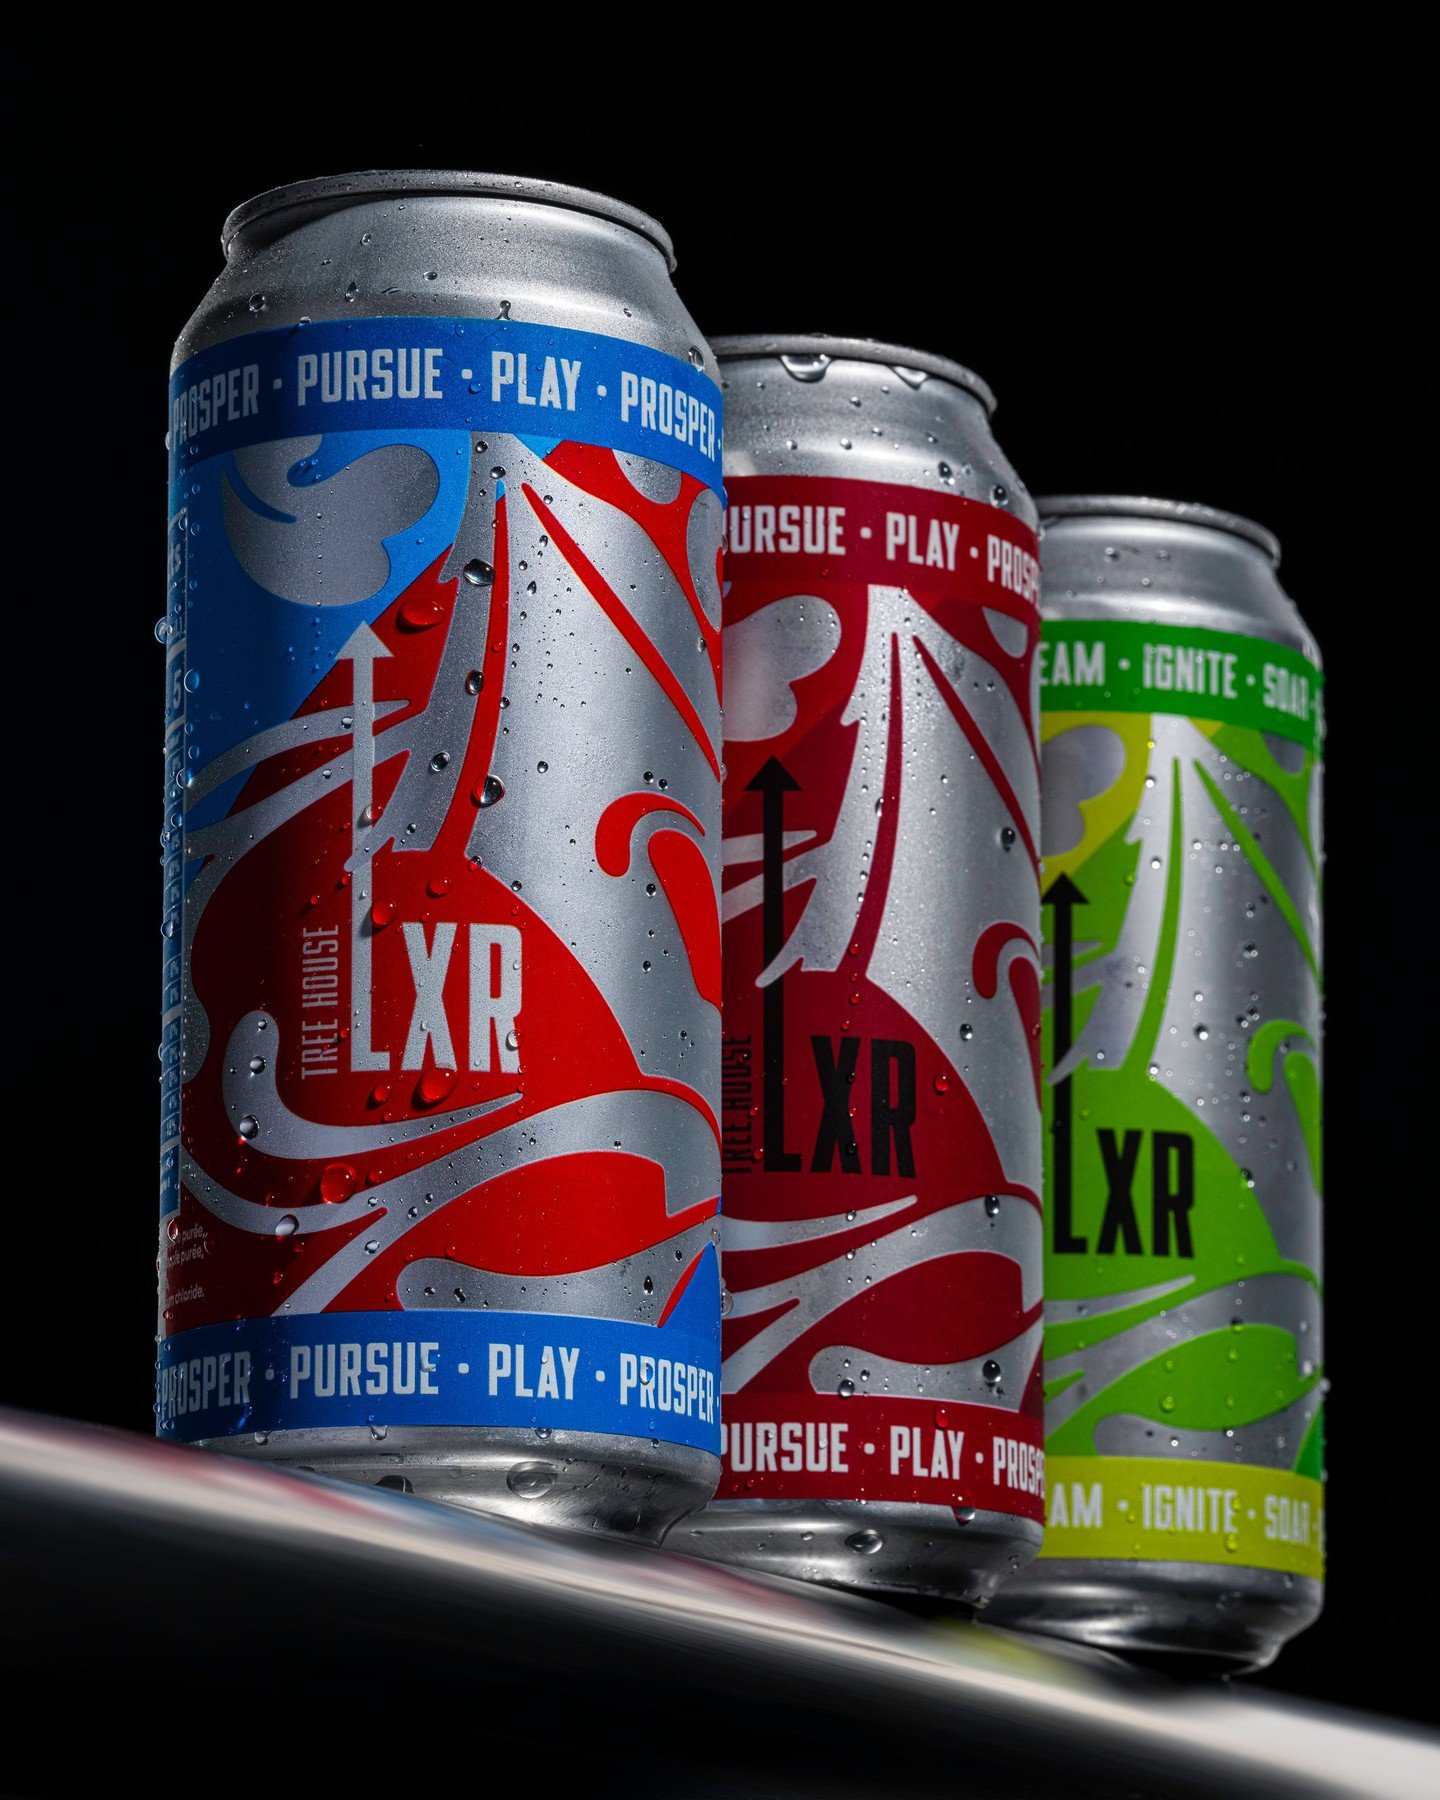 Today marks the introduction of a brand new flavor in our LXR line of electrolyte recovery and performance beverages:

Tropical Punch!

Tropical Punch contains a cornucopia of fruit pure&eacute;, including passion fruit, guava, orange, apple, mango, 